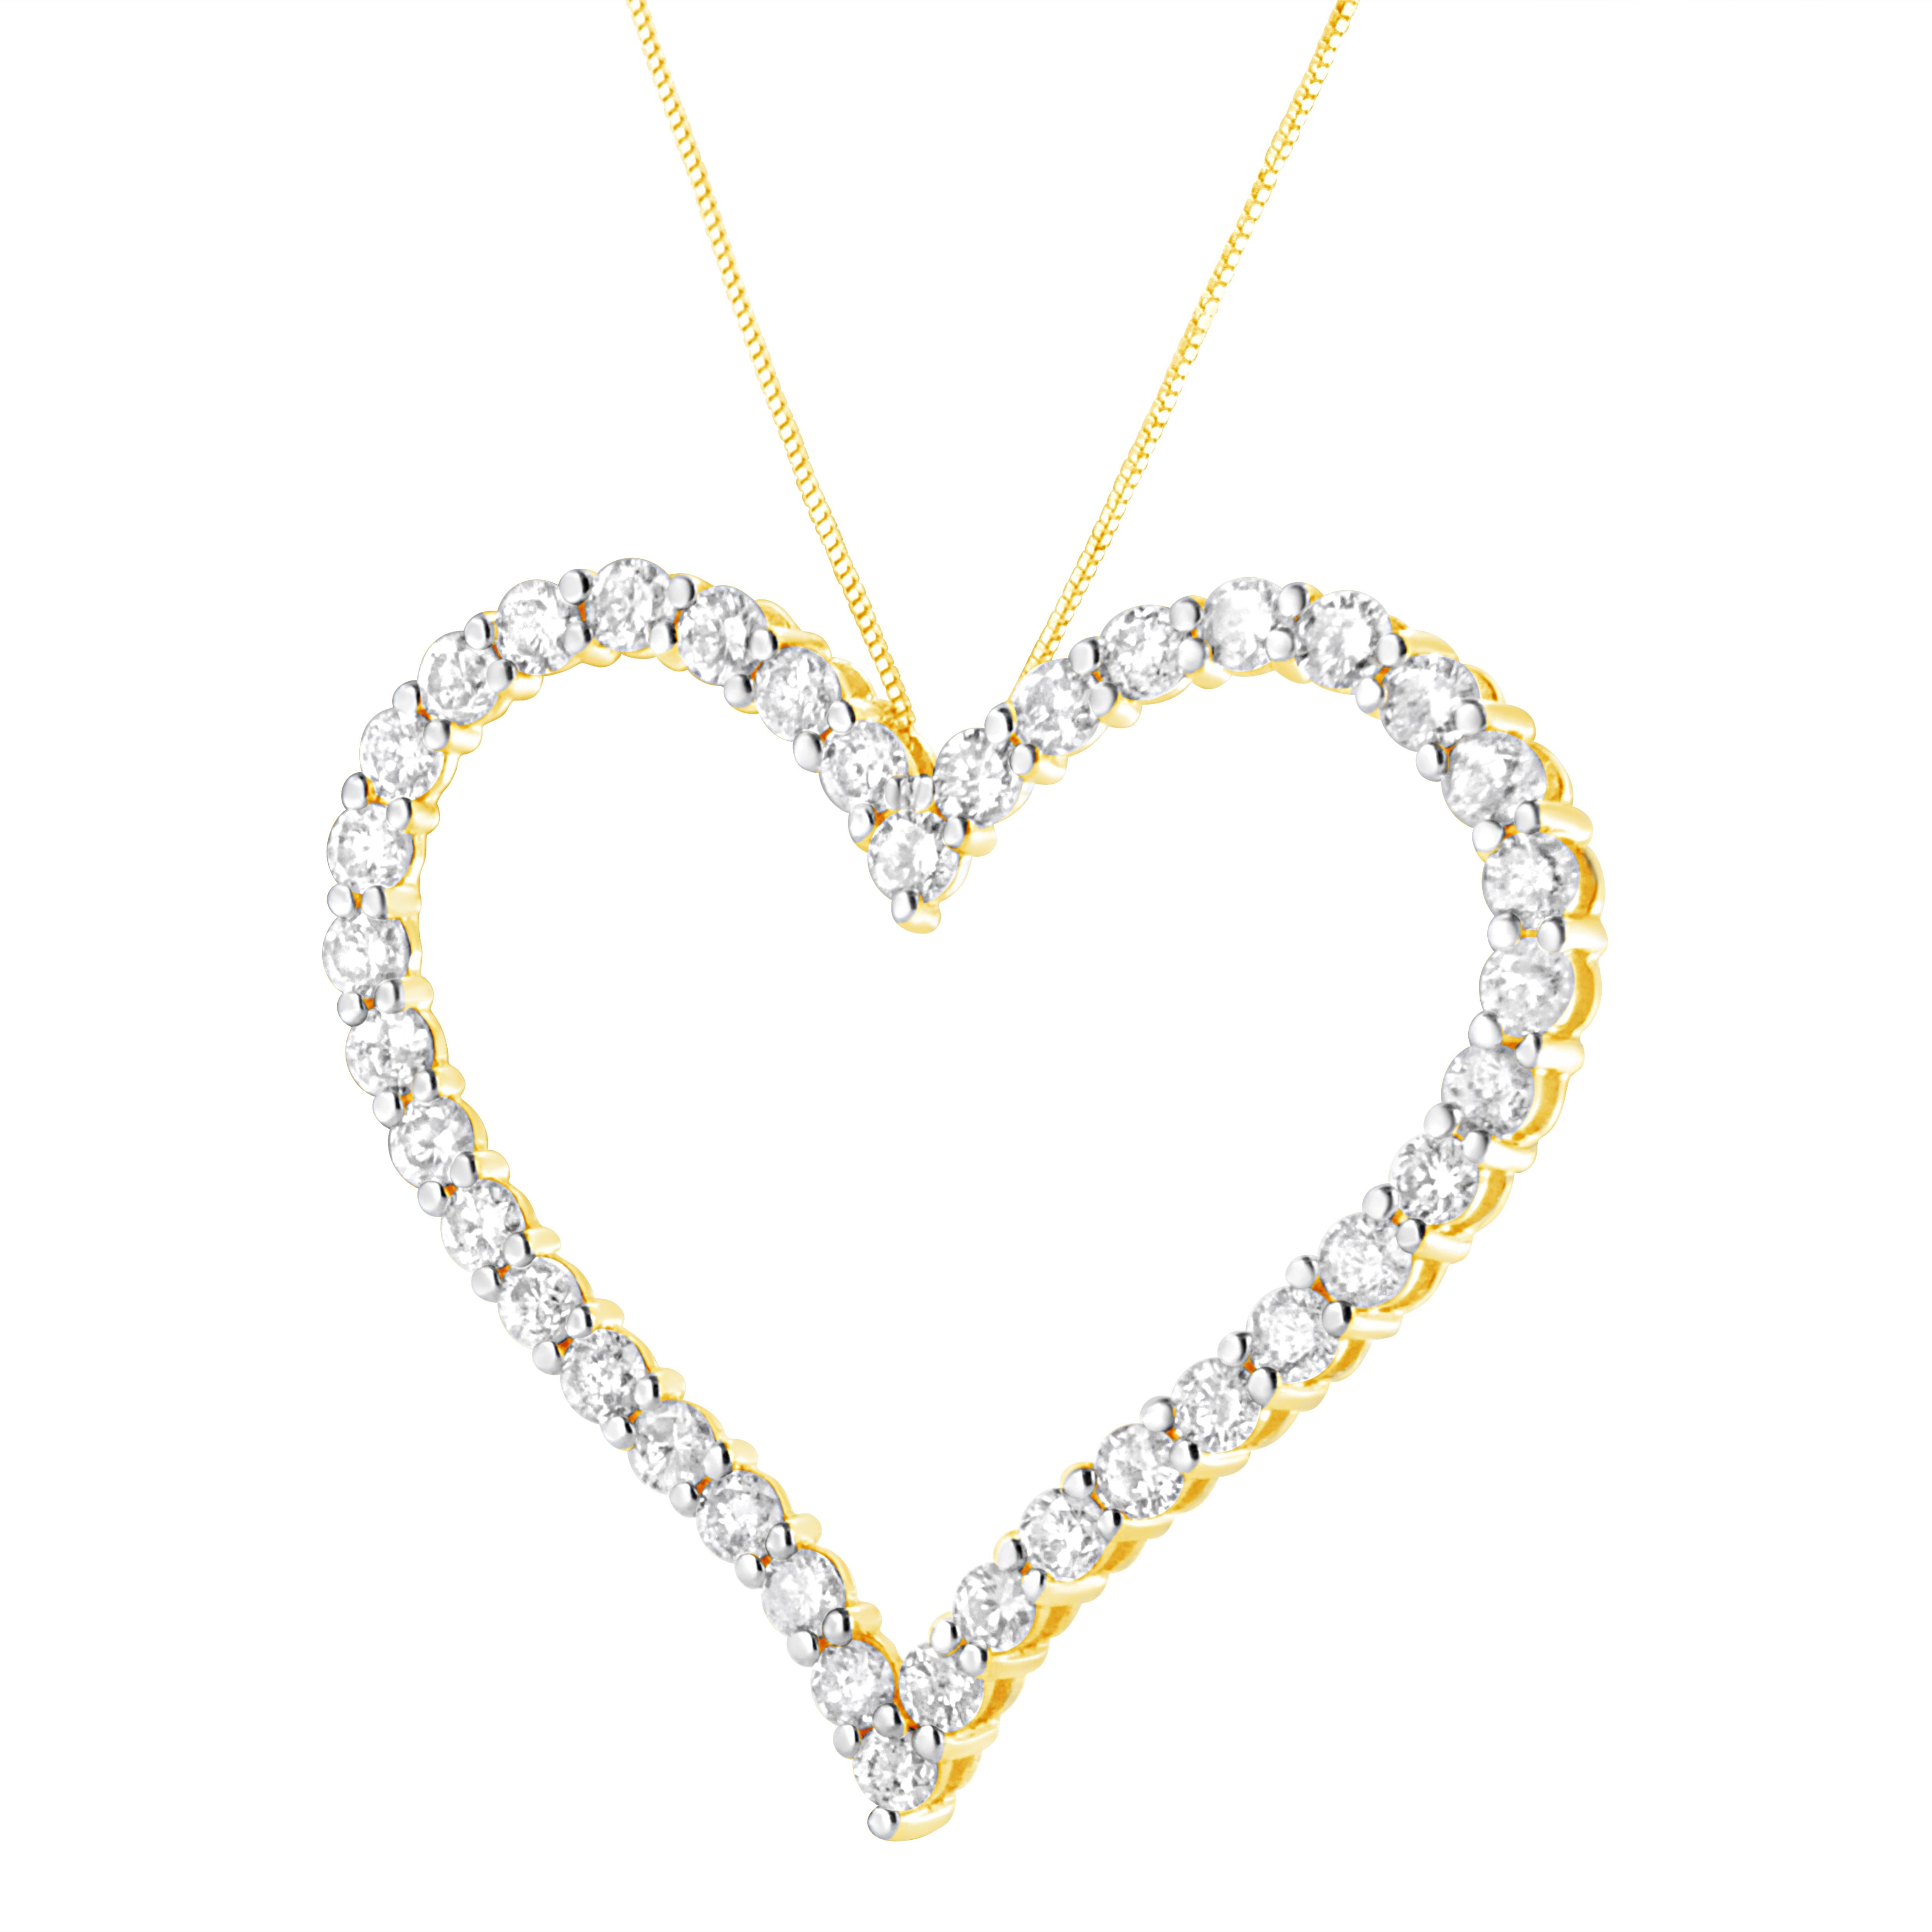 Contemporary Yellow Gold Plated Sterling Silver 3.0 Carat Diamond Open Heart Pendant Necklace For Sale